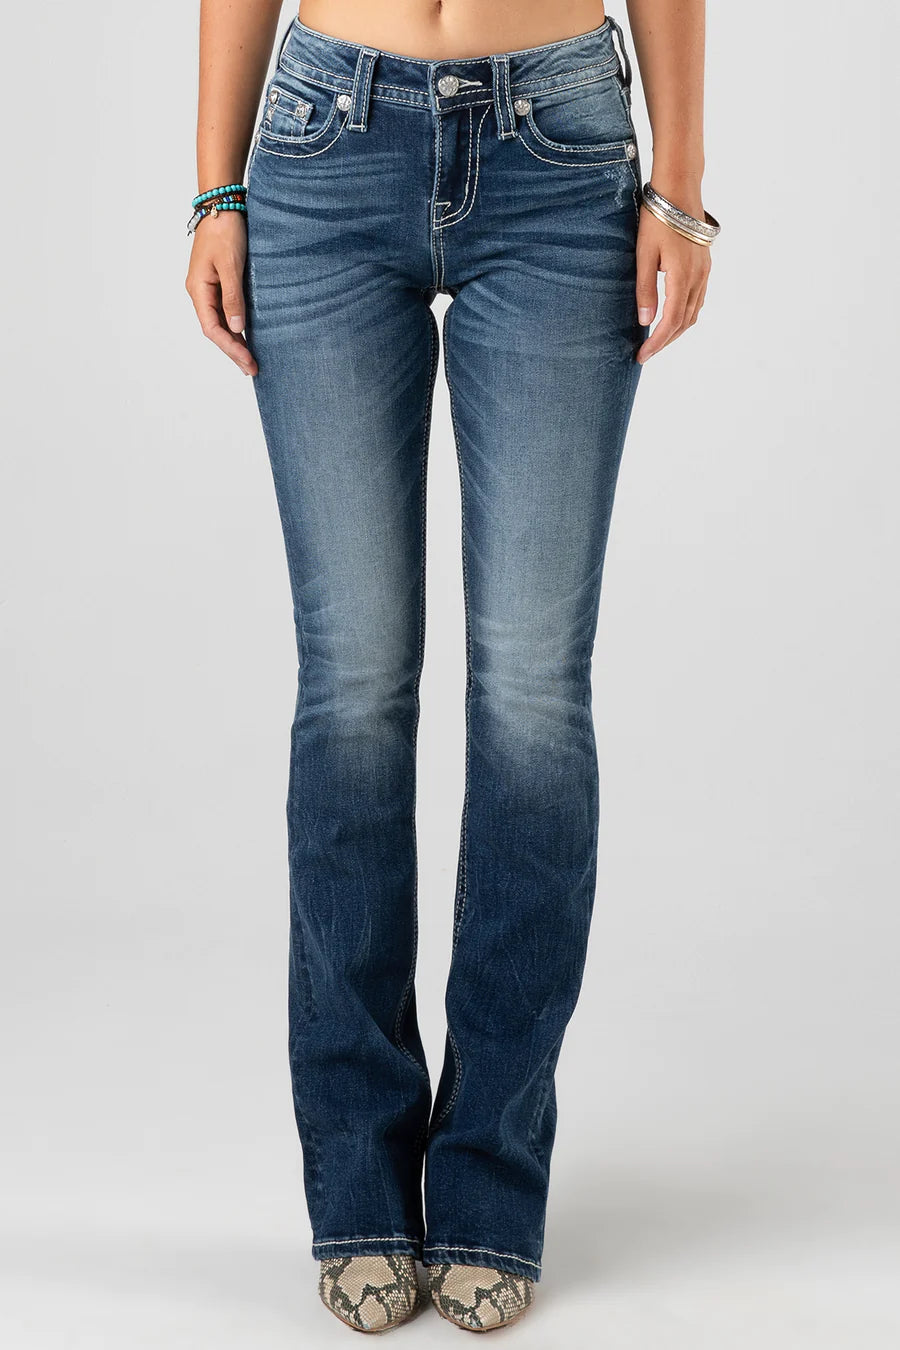 M787 Mid Rise Boot Jeans